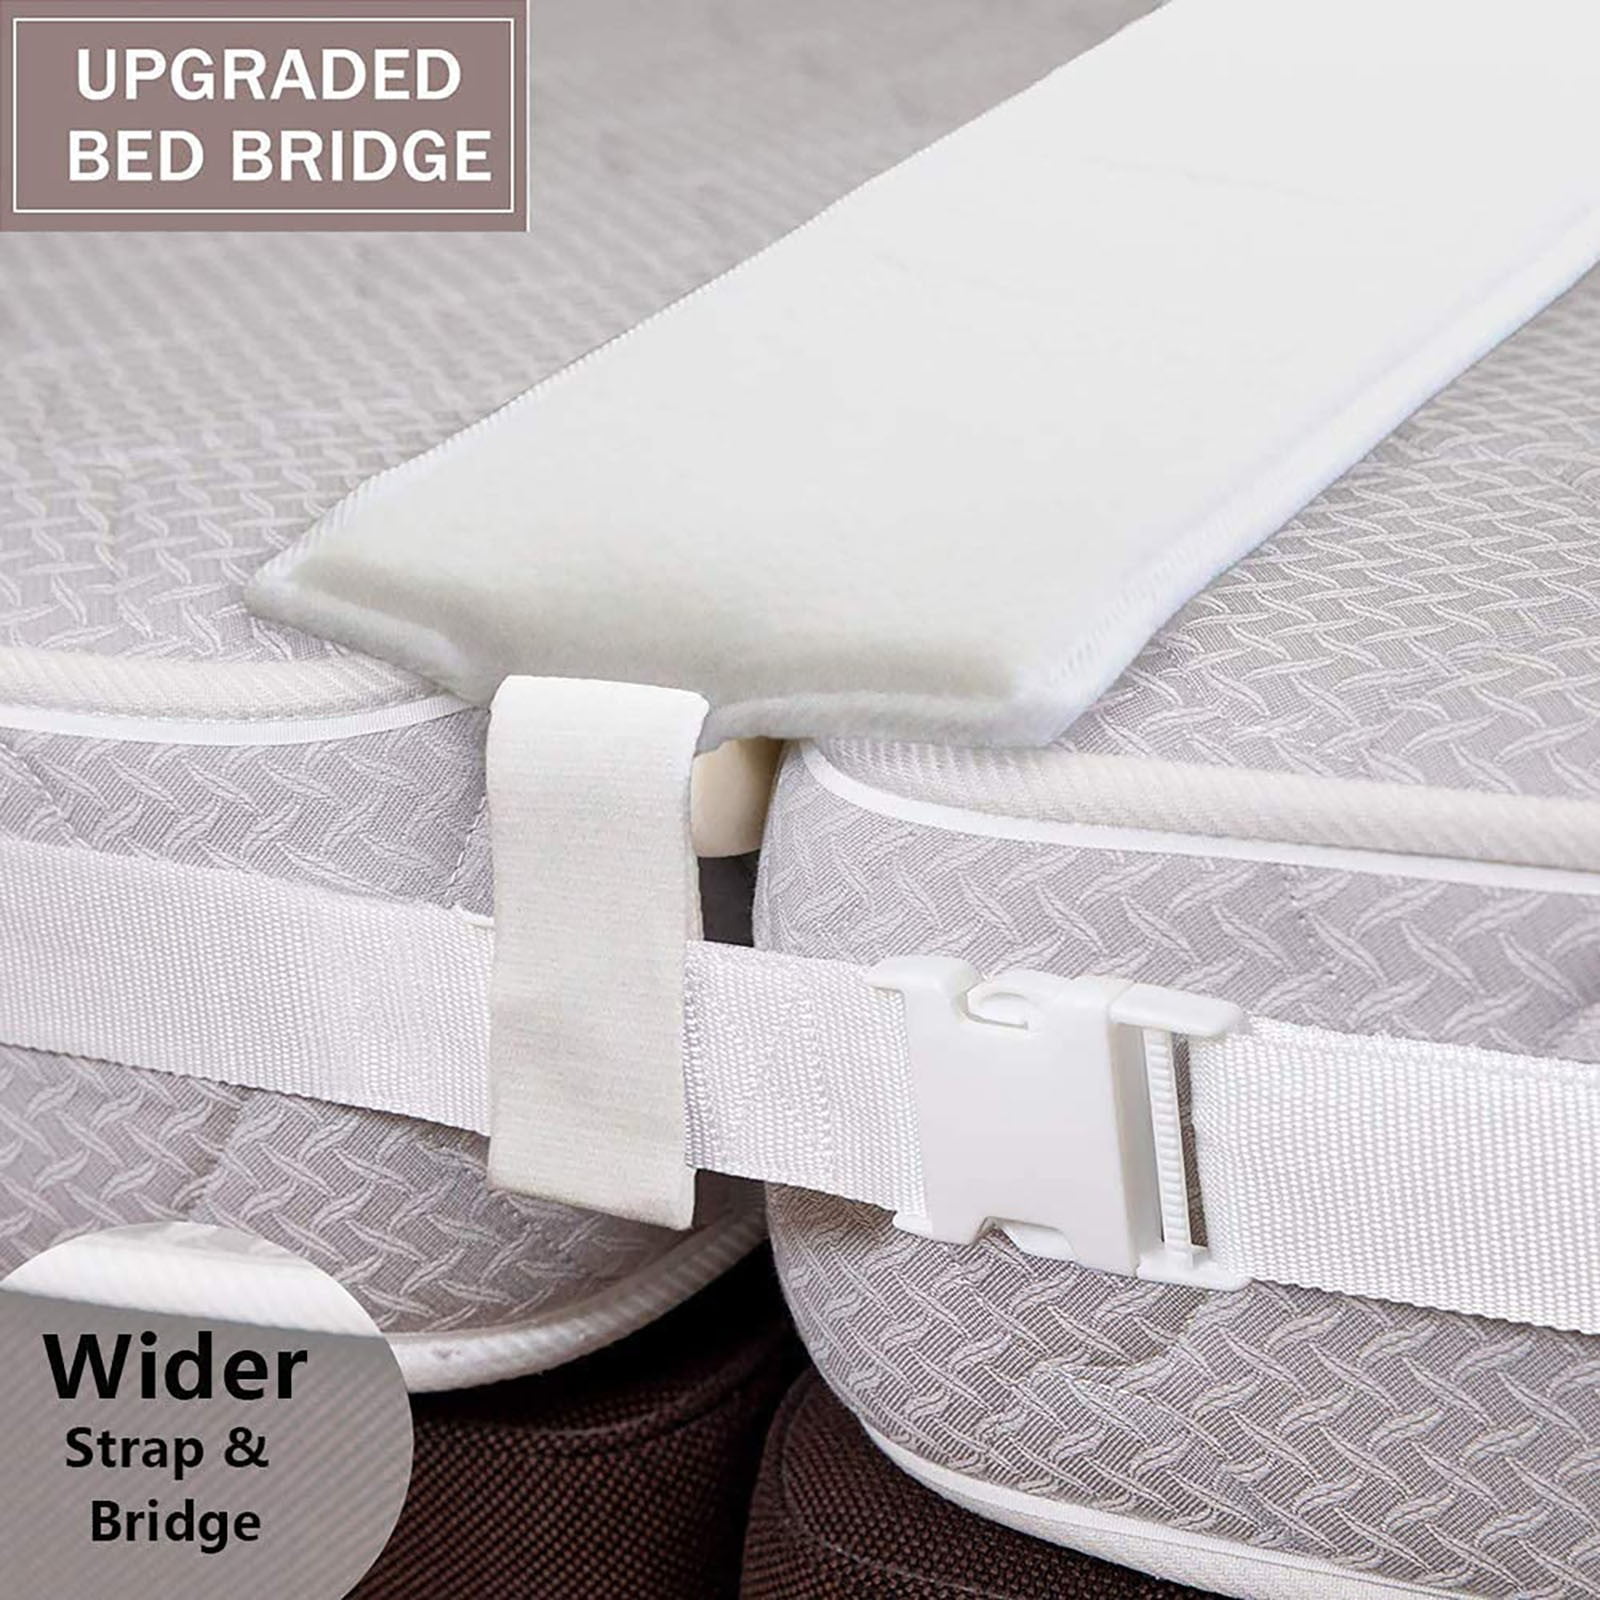 Bamboo Bed Bridge Twin To King Converter Kit - Wide Bed Gap Filler to Make  Twin Beds Into King - Adjustable 2 Inch Wide Mattress Connecting Strap and